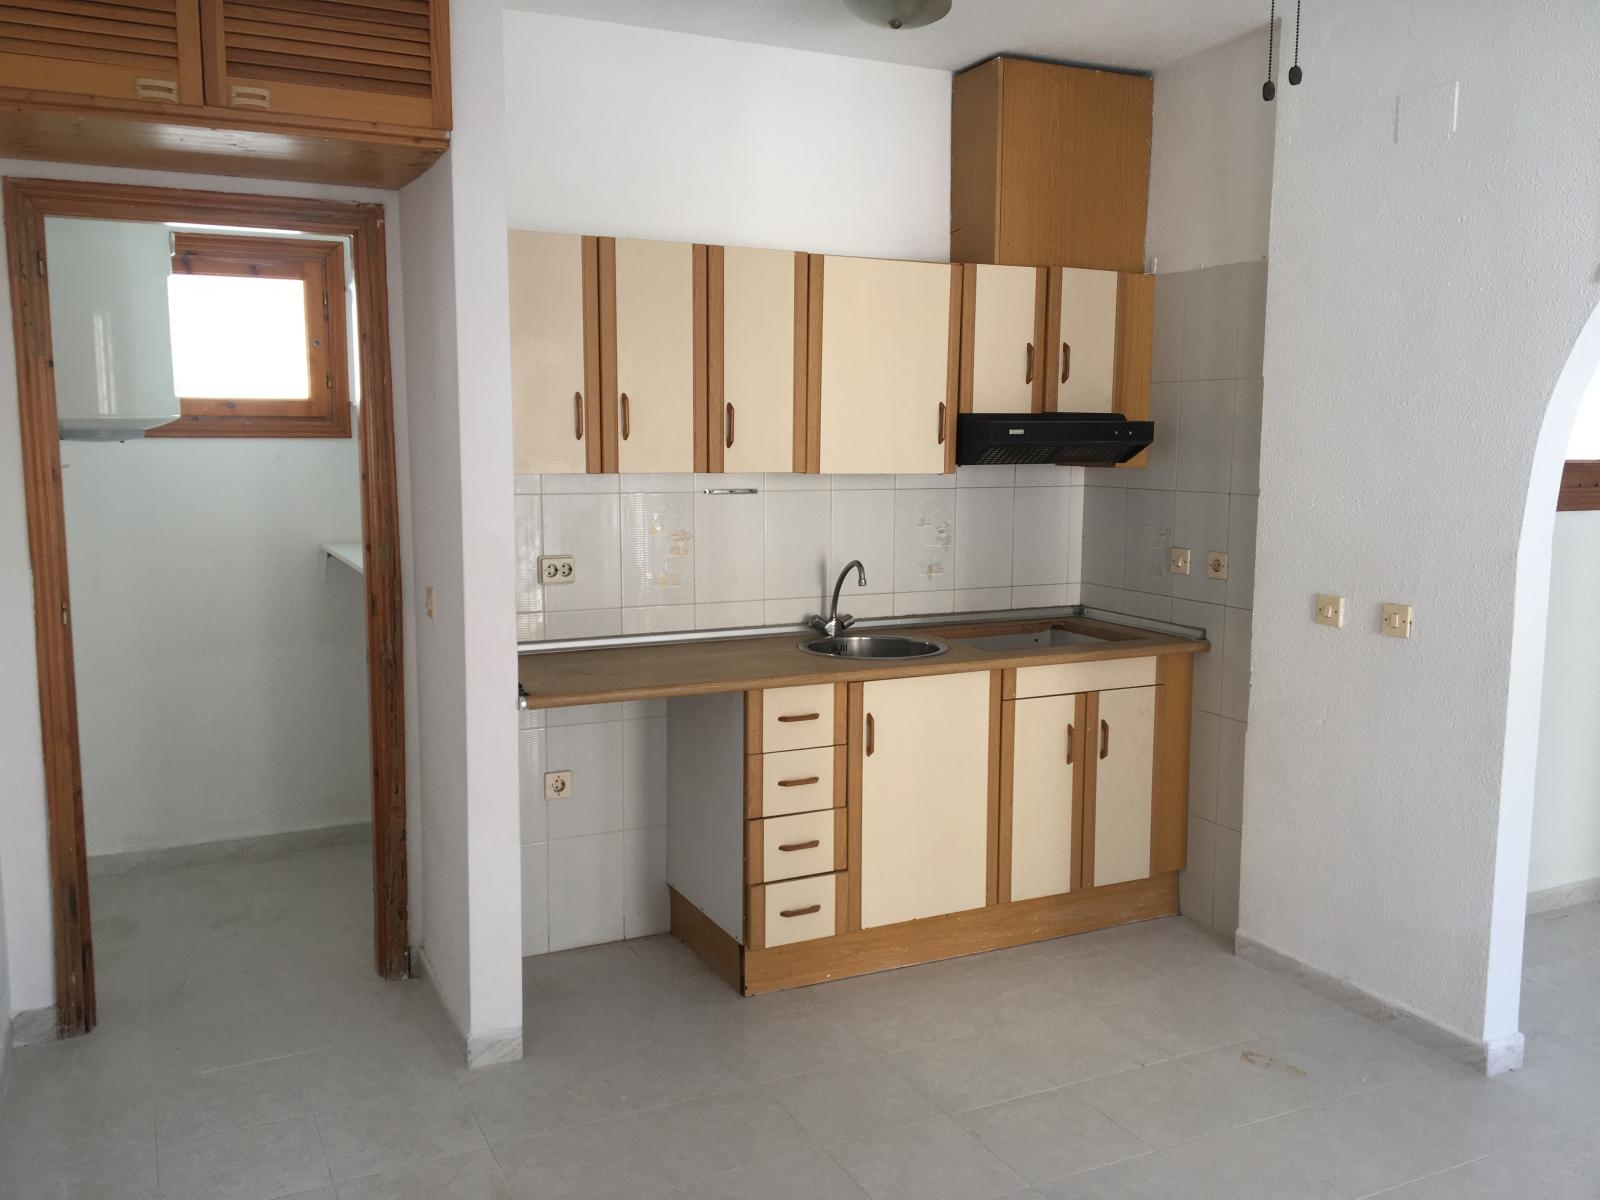 MAKE YOUR OFFER!! 1 BEDROOM APARTMENT WITH TERRACE!!